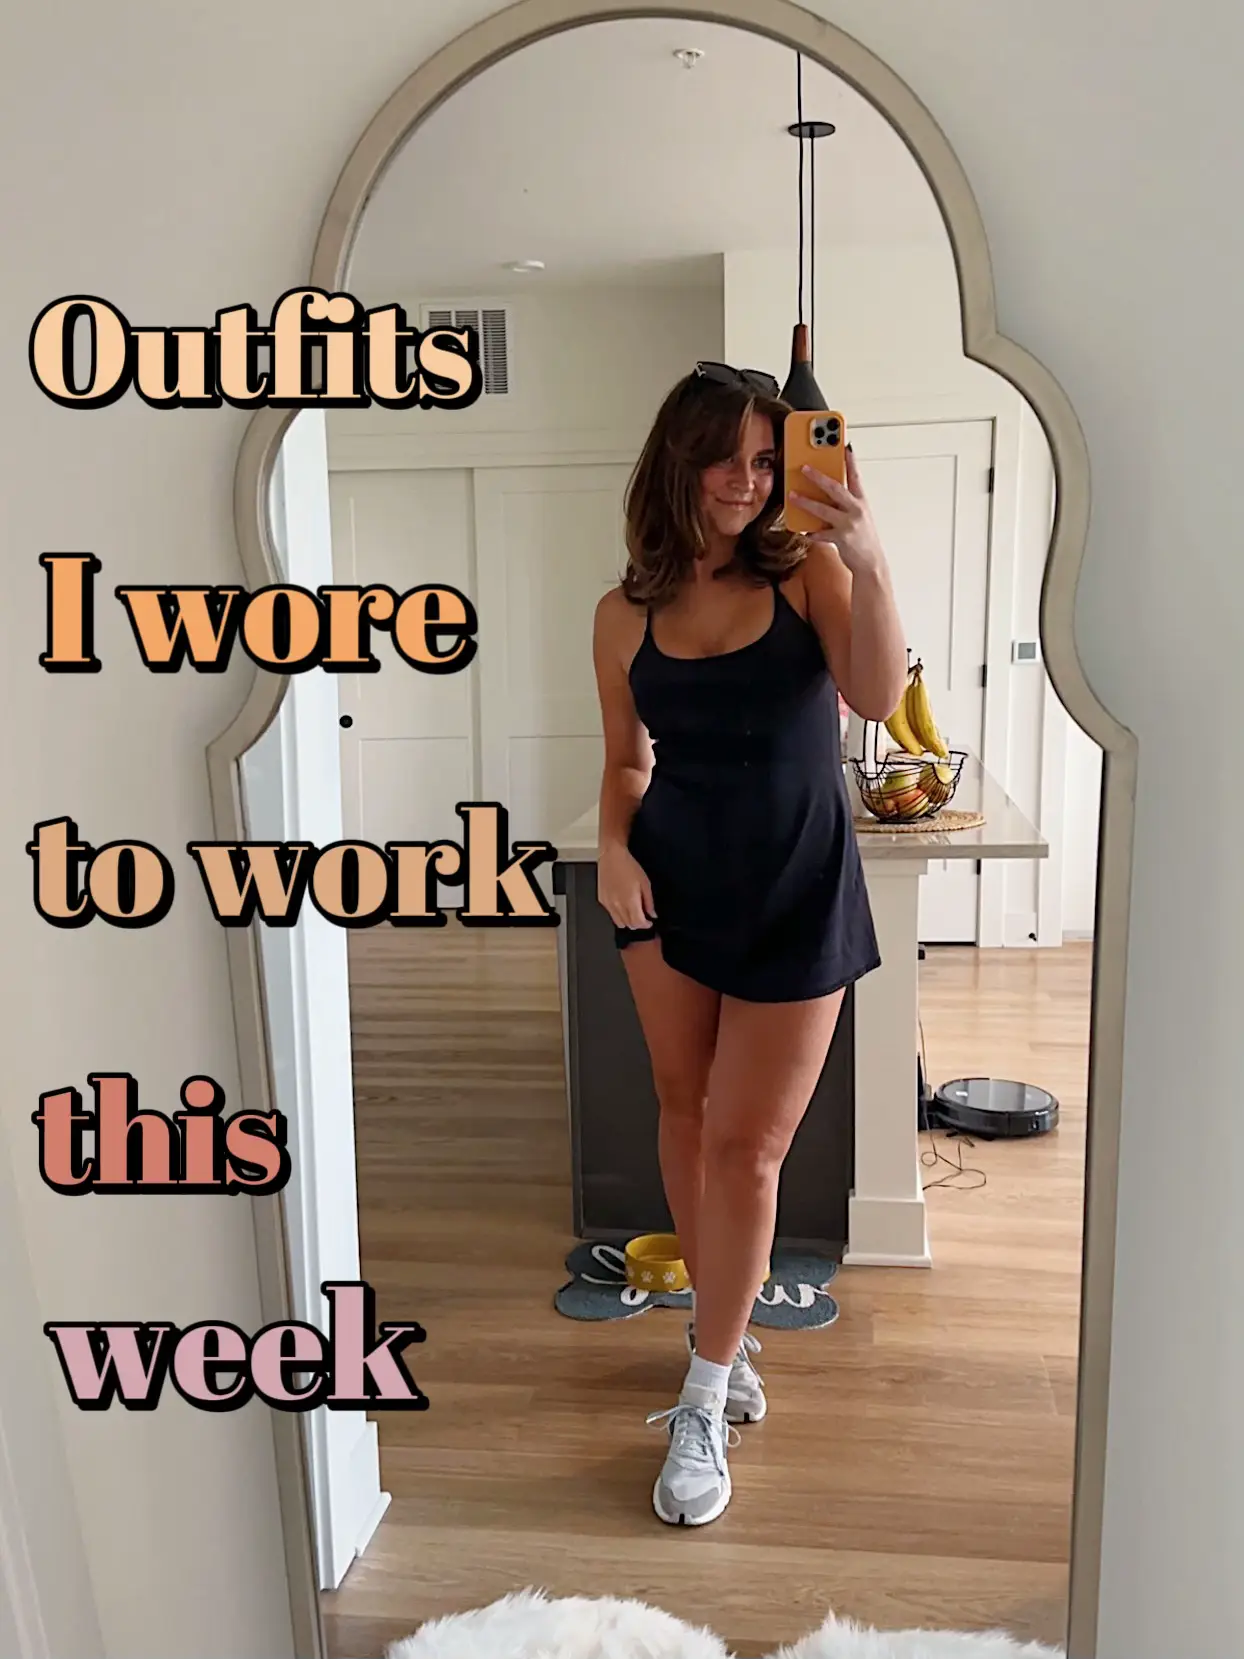 comfy activewear outfits - Lemon8 Search